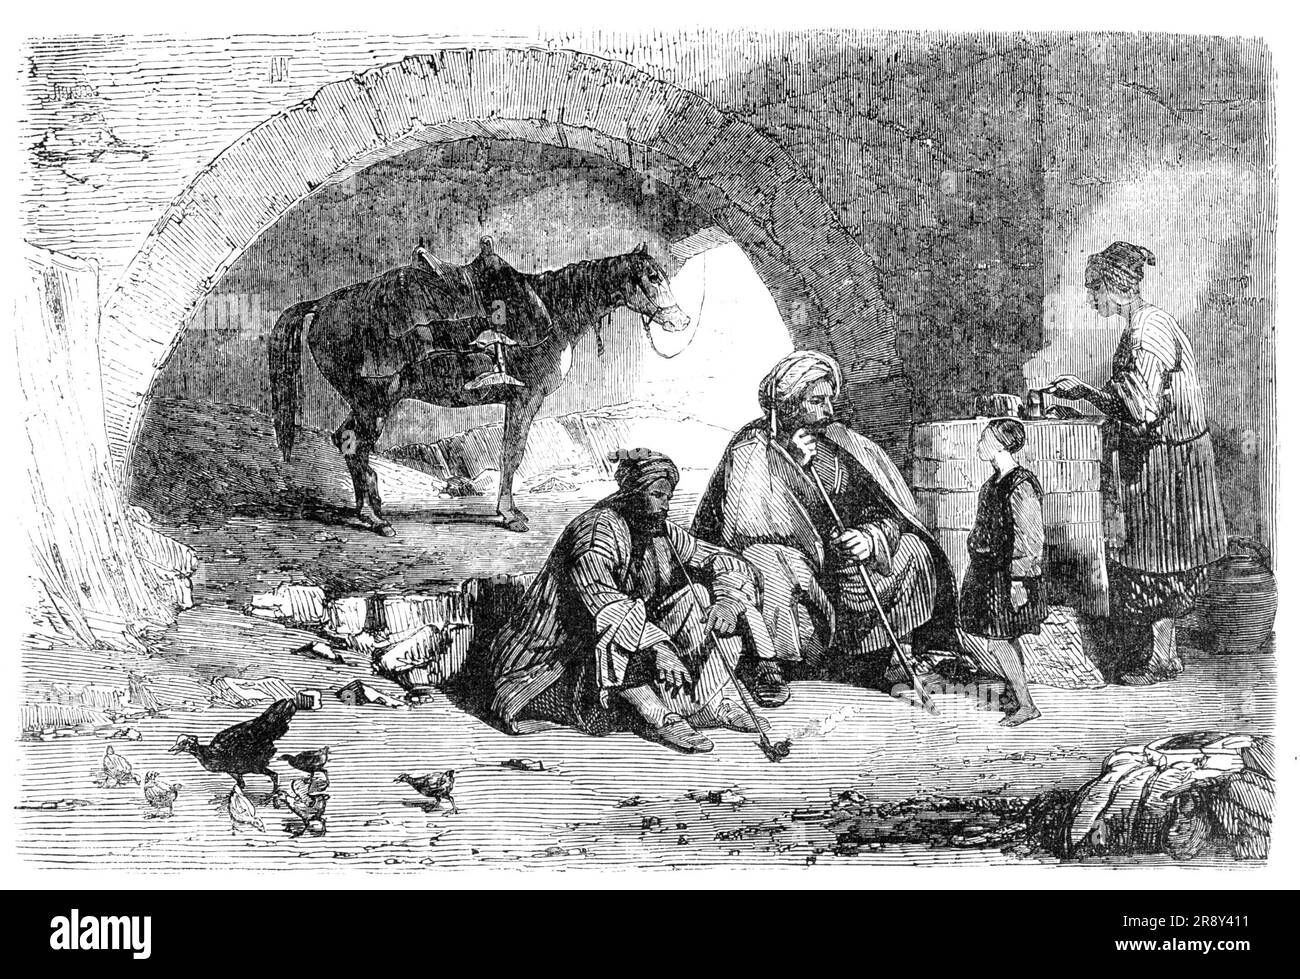 The Desert Route - Khan near Nahar-el-Kelb, the Ancient Lycus, three leagues from Beyrout, 1857. 'The Khan, as you perceive, is a wretched old affair, damp, and full of rubbish. Here, at a temporary charcoal stove, a poor coffegee is eternally making coffee for casual droppers-in; while his boy, in what was once a white skullcap, is handing the small cups to and from the guests. Two recent arrivals are seen partaking of this luxury. The horse is probably...the property of both, on which they perform their journeyings alternately - the distinguishing sign of their intentions being the unlooseni Stock Photo